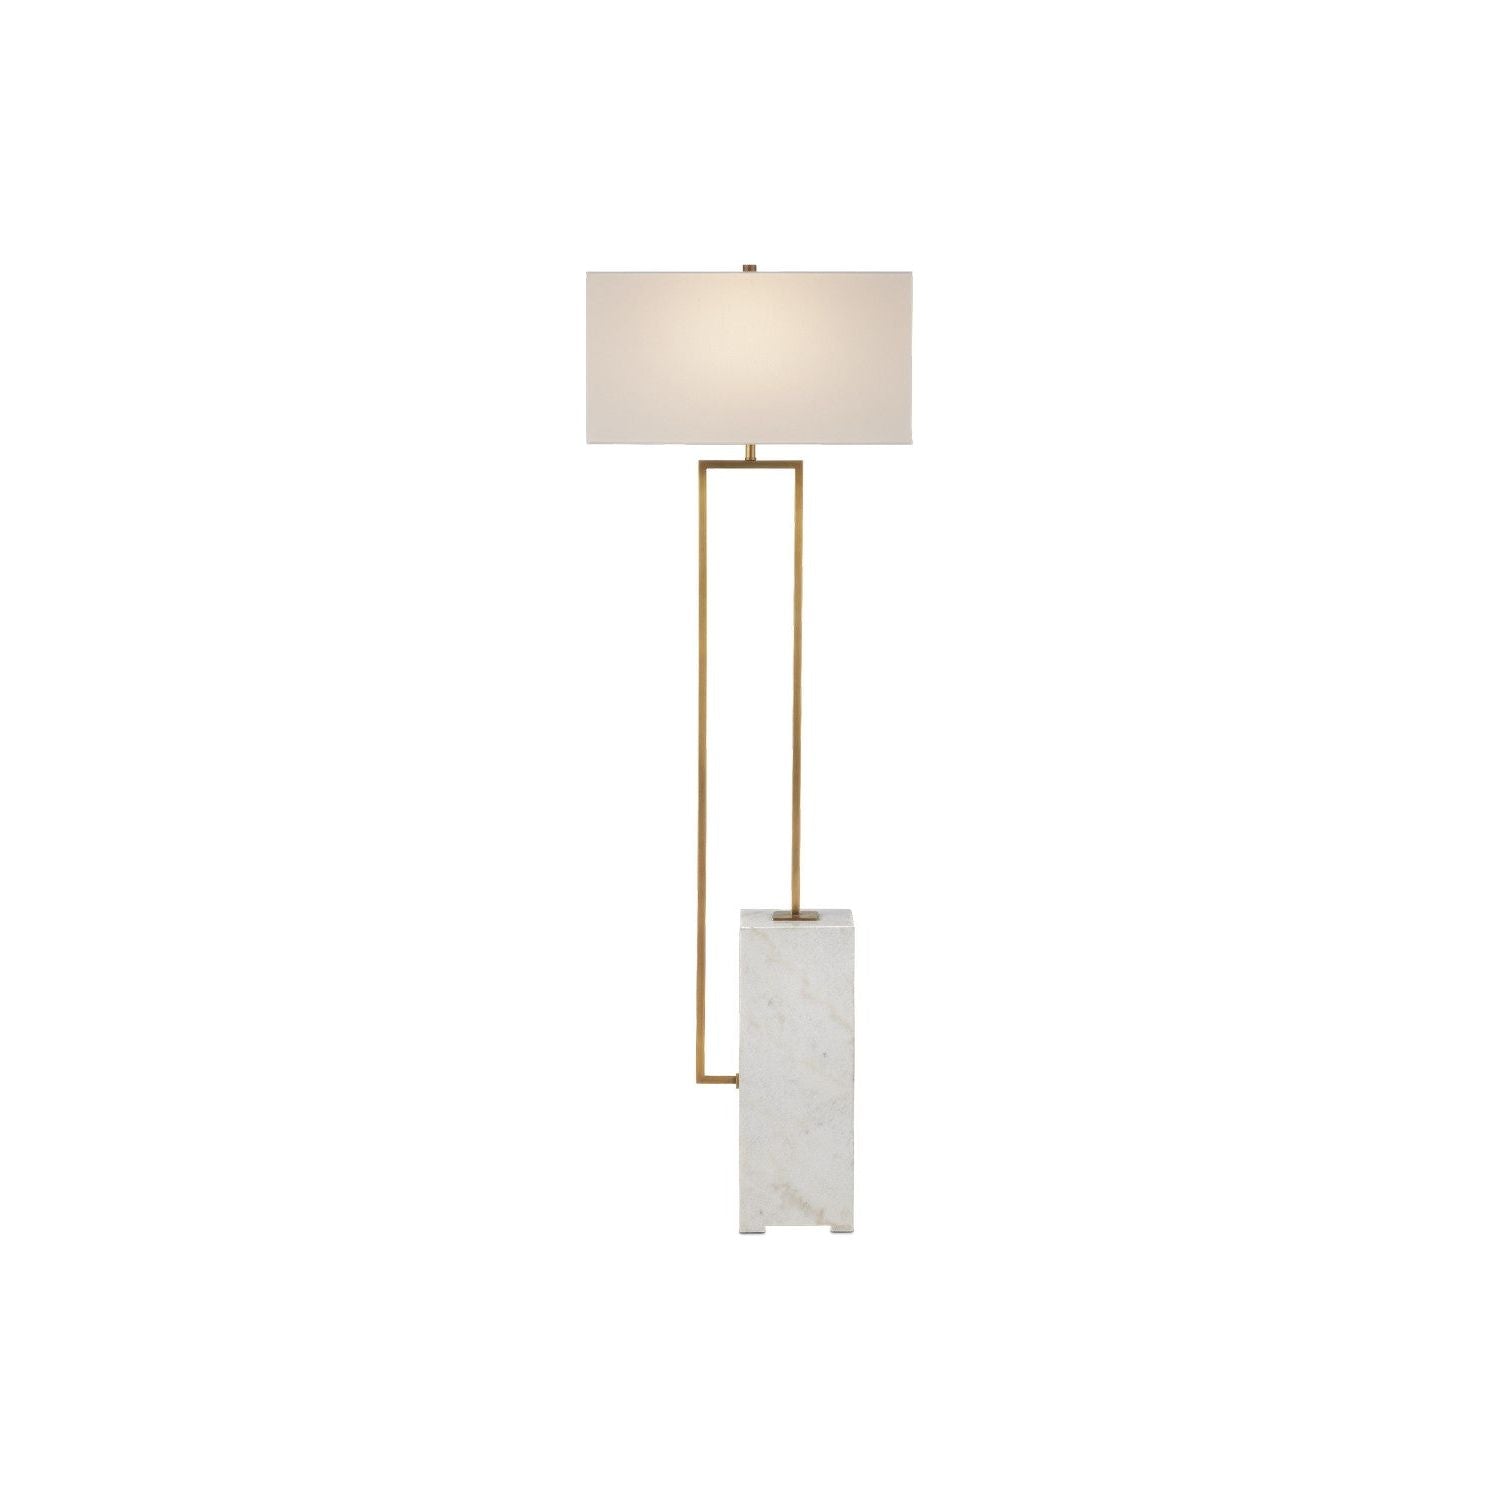 Currey and Company - 8000-0154 - One Light Floor Lamp - White/Antique Brass